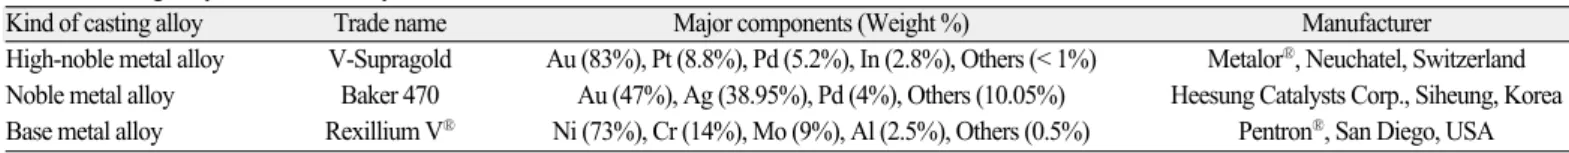 Table 2. Mechanical properties of the casting alloys